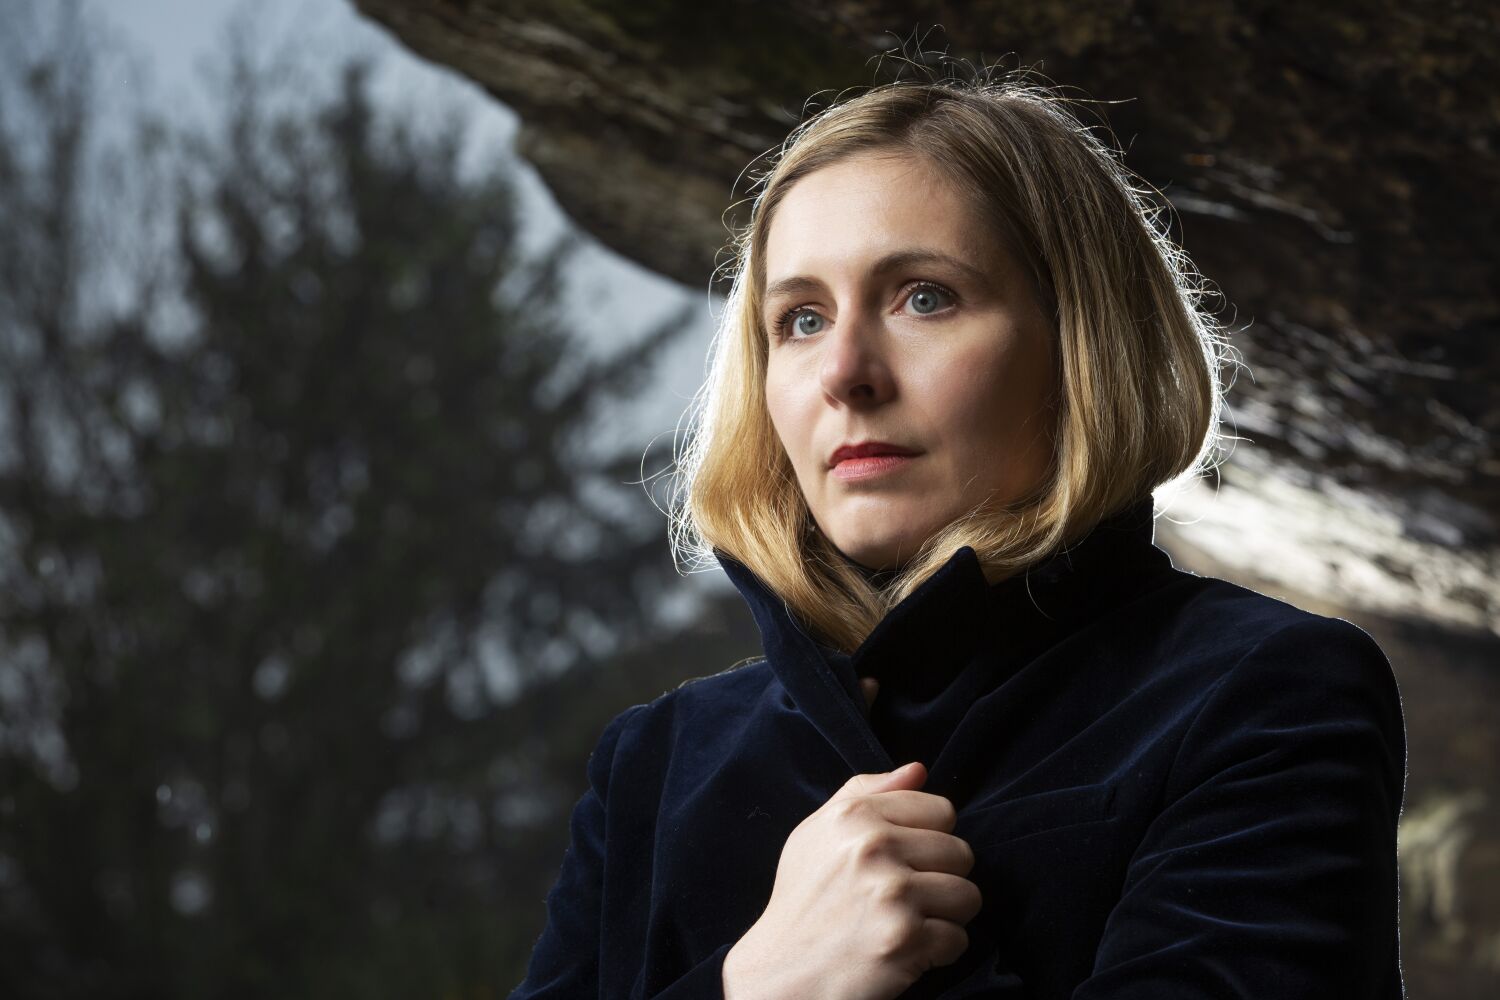 Eleanor Catton follows a messy, Booker-winning novel with a tidy thriller. That's a shame